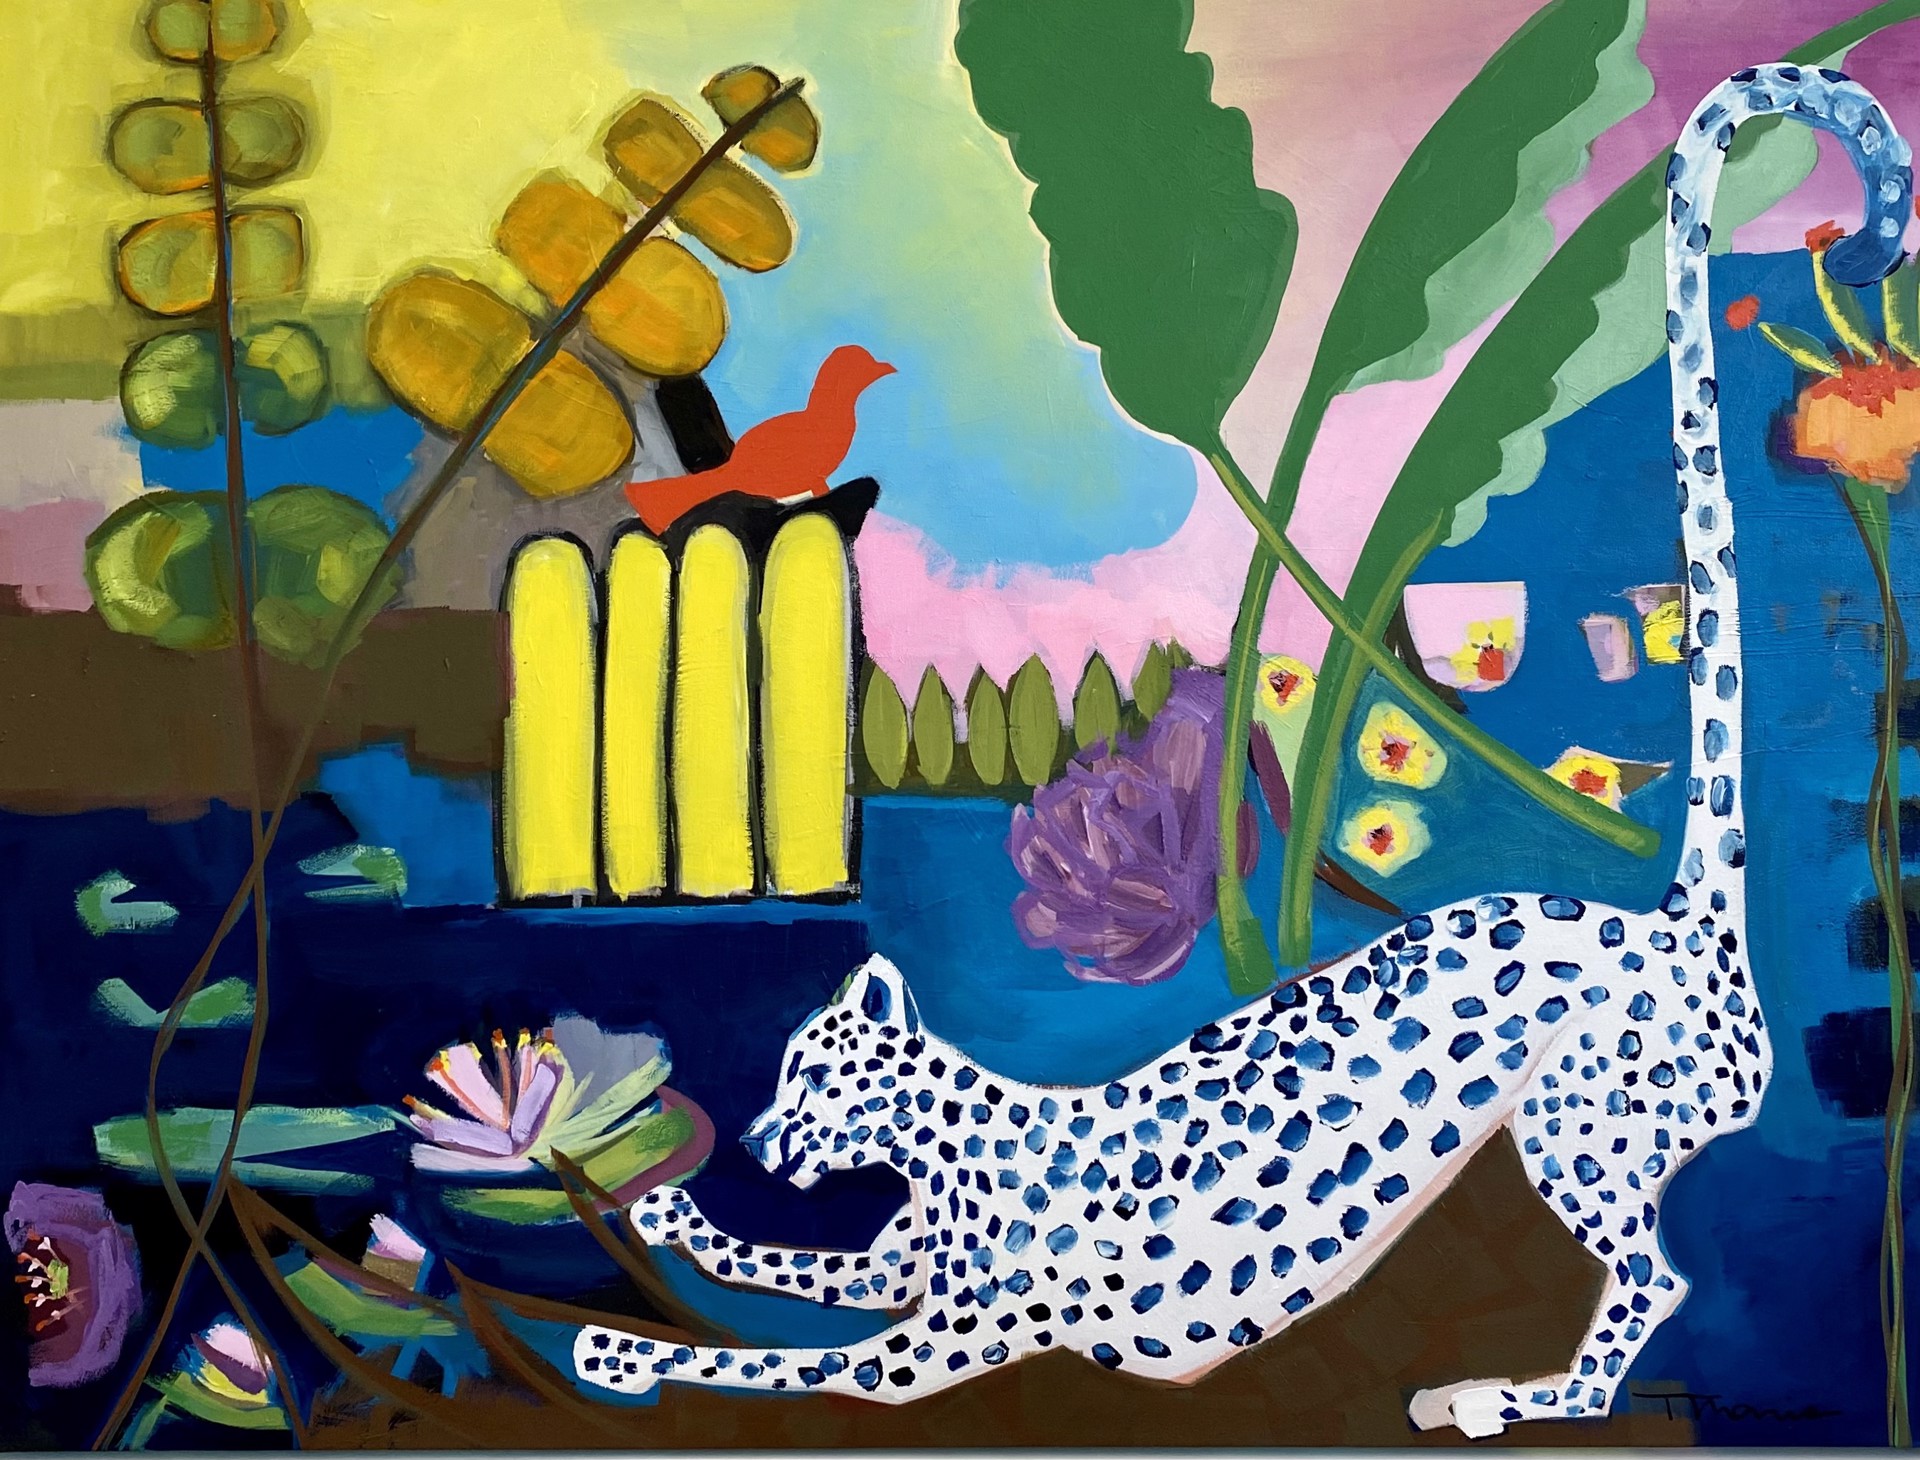 Leopard by the Waterfall by Trudi Norris